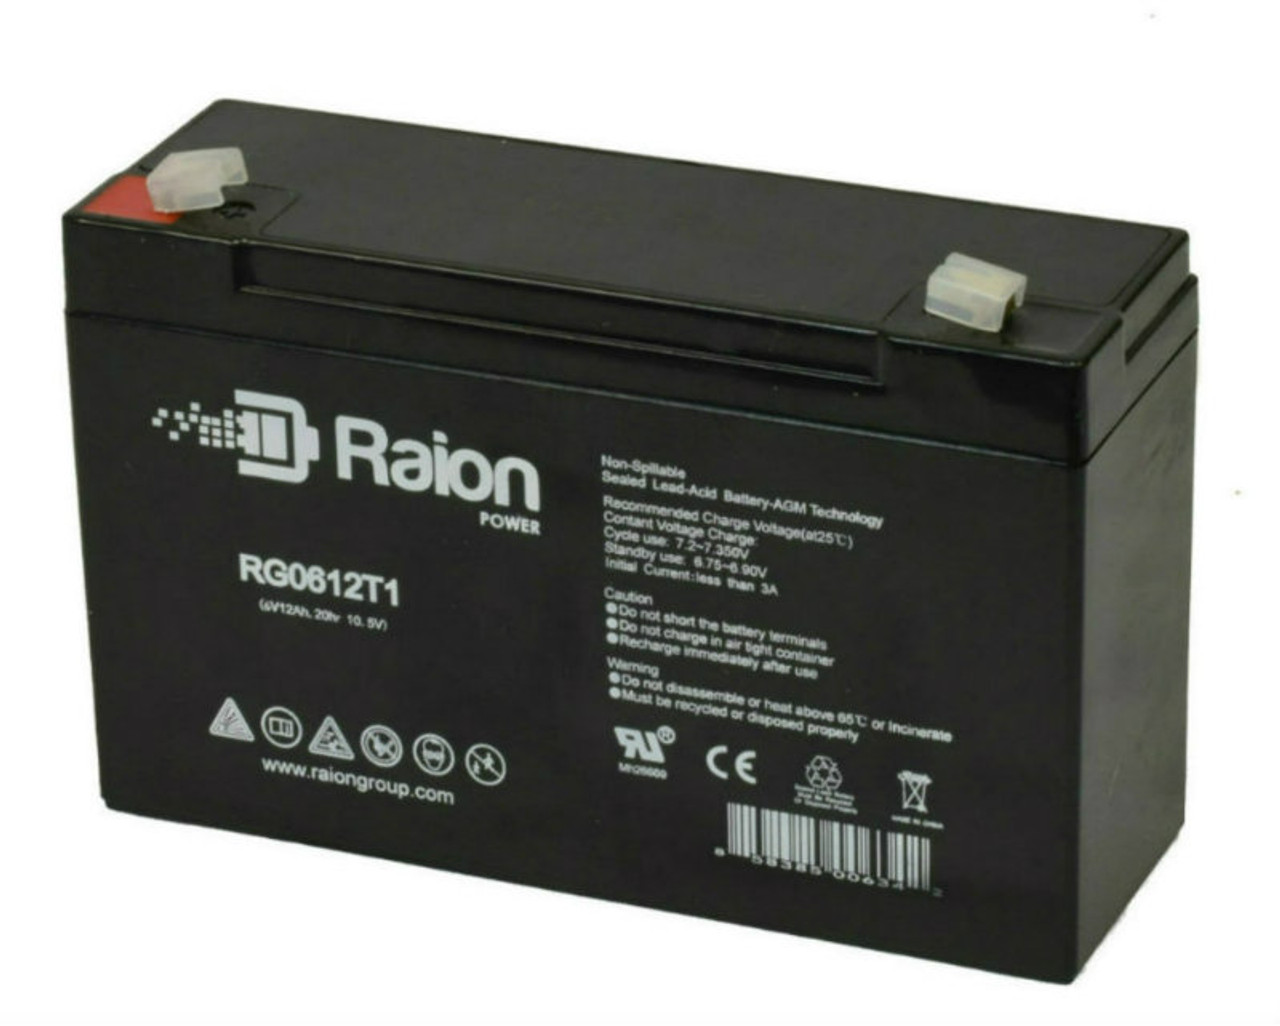 Raion Power RG06120T1 Replacement Battery for Teledyne Big Beam 2SC6S8